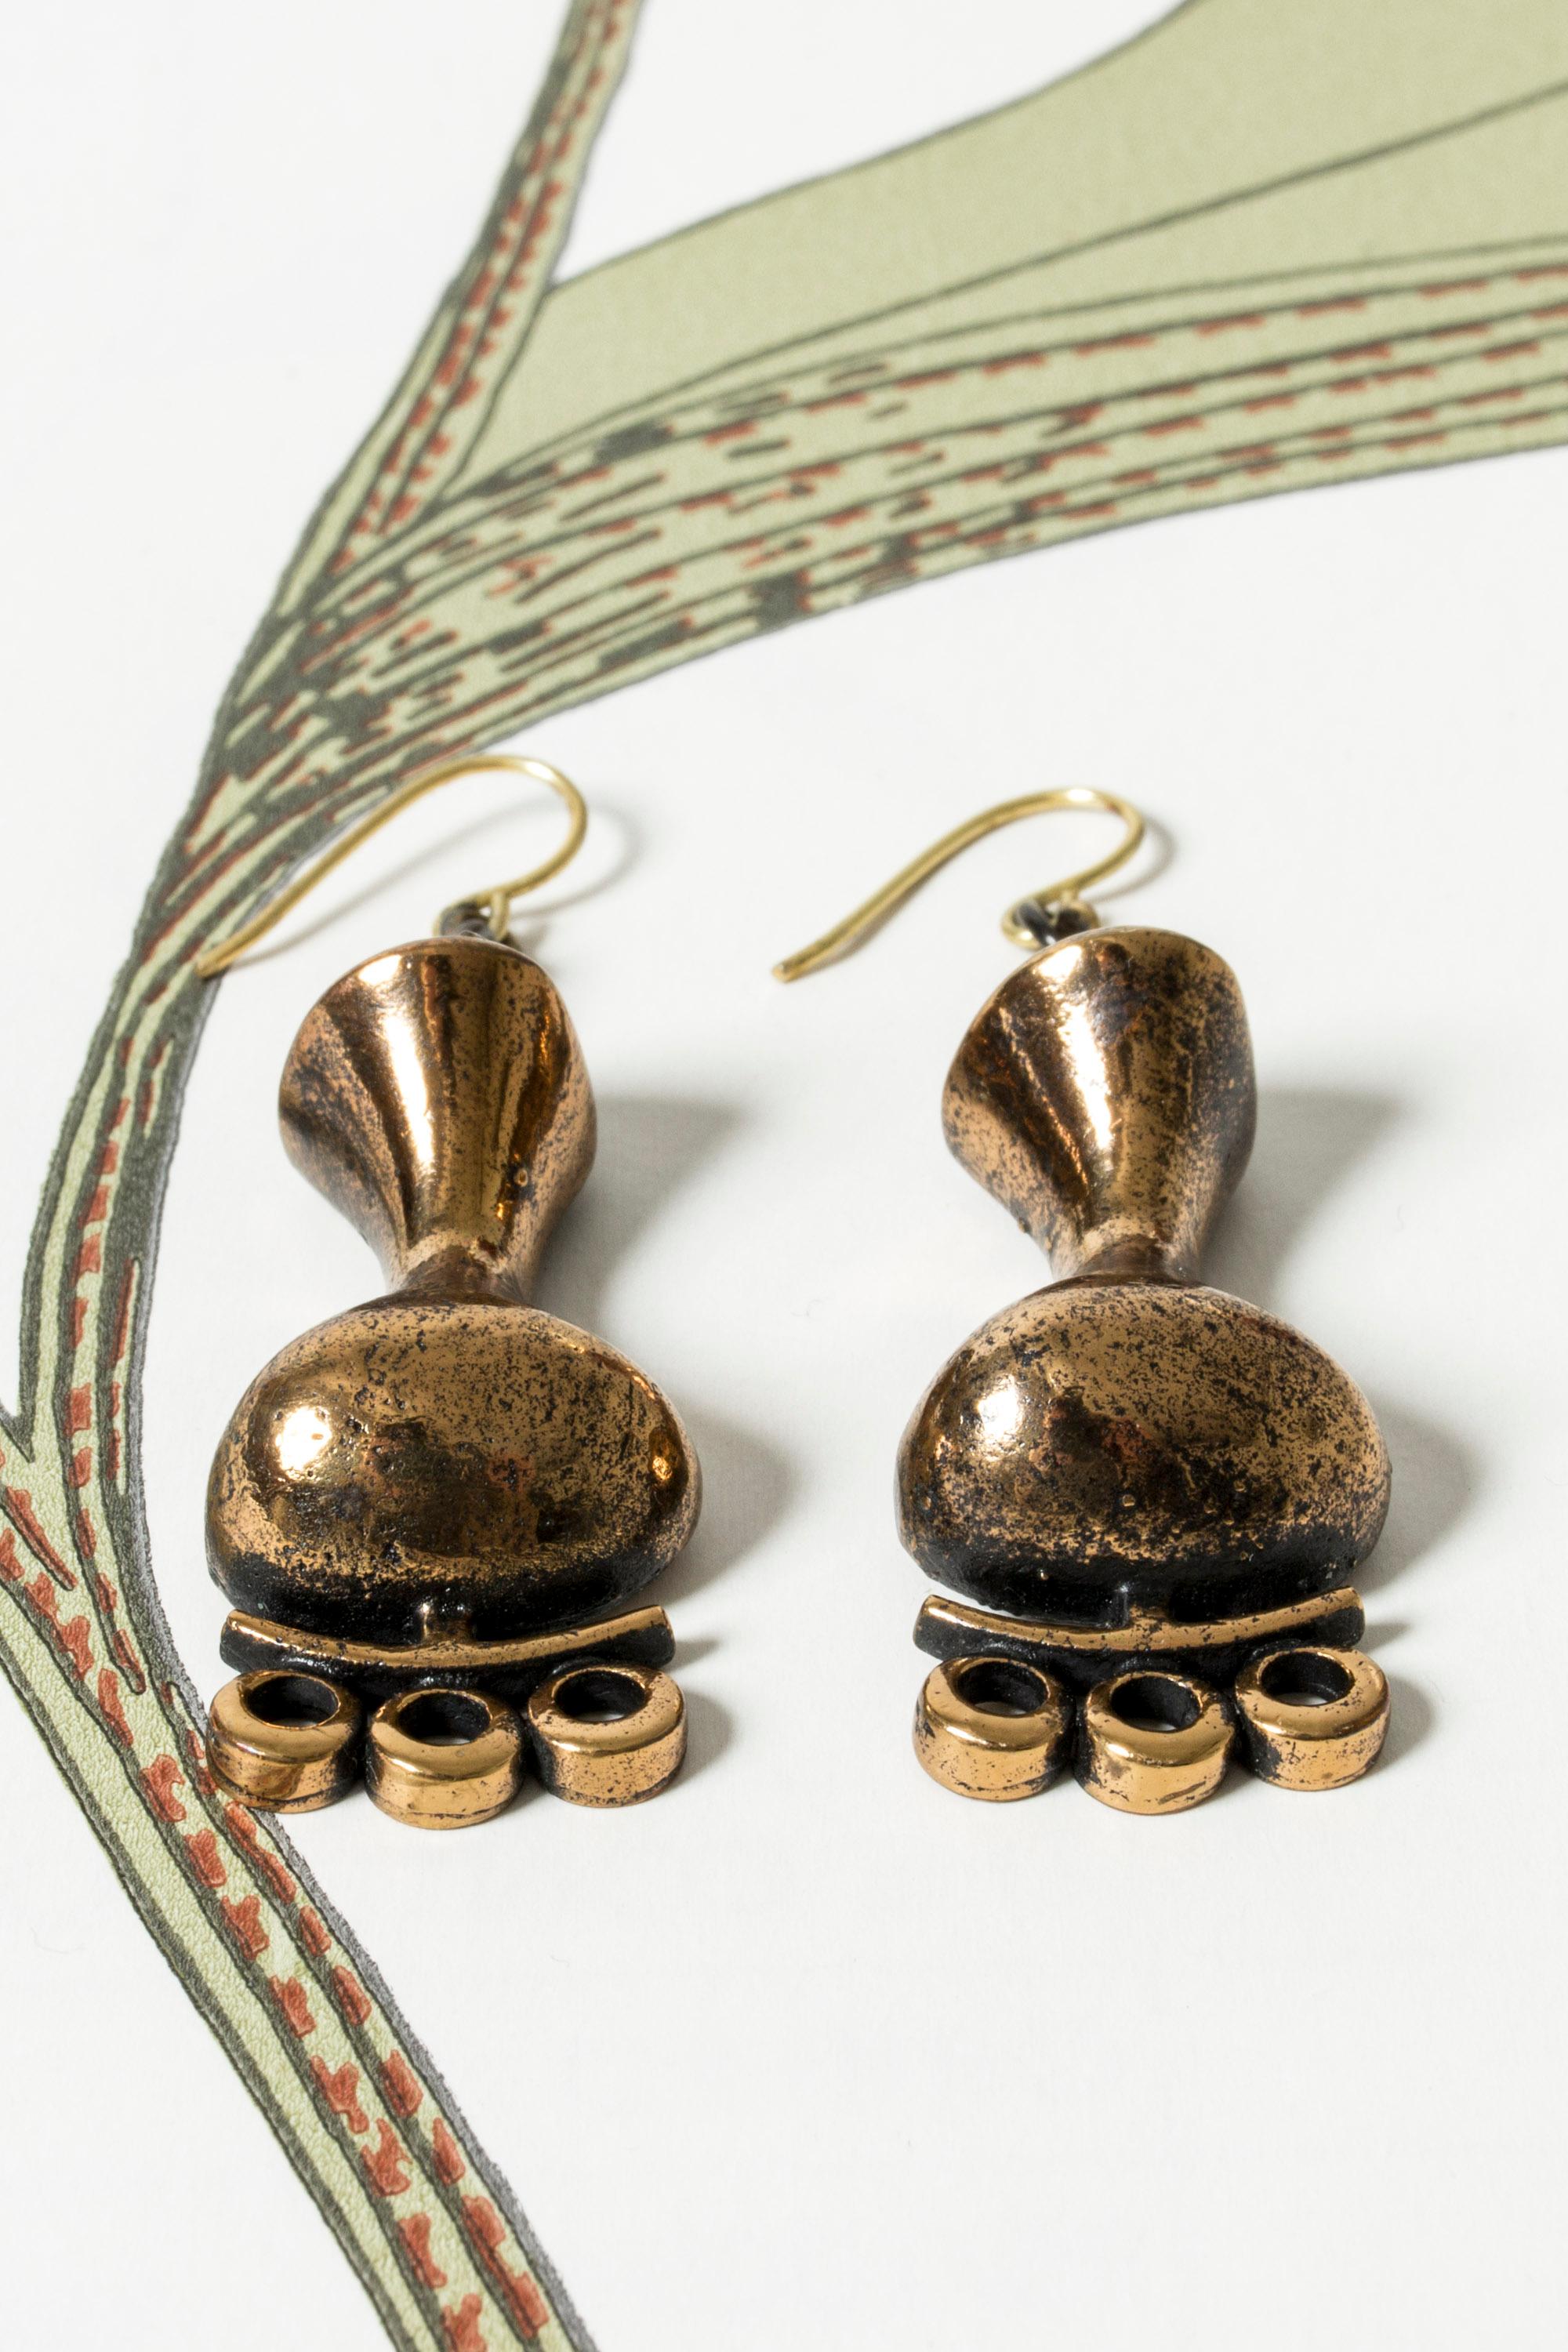 Beautiful bronze earrings by Jorma Laine, in an imaginative, enigmatic design characteristic of Laine’s later work.